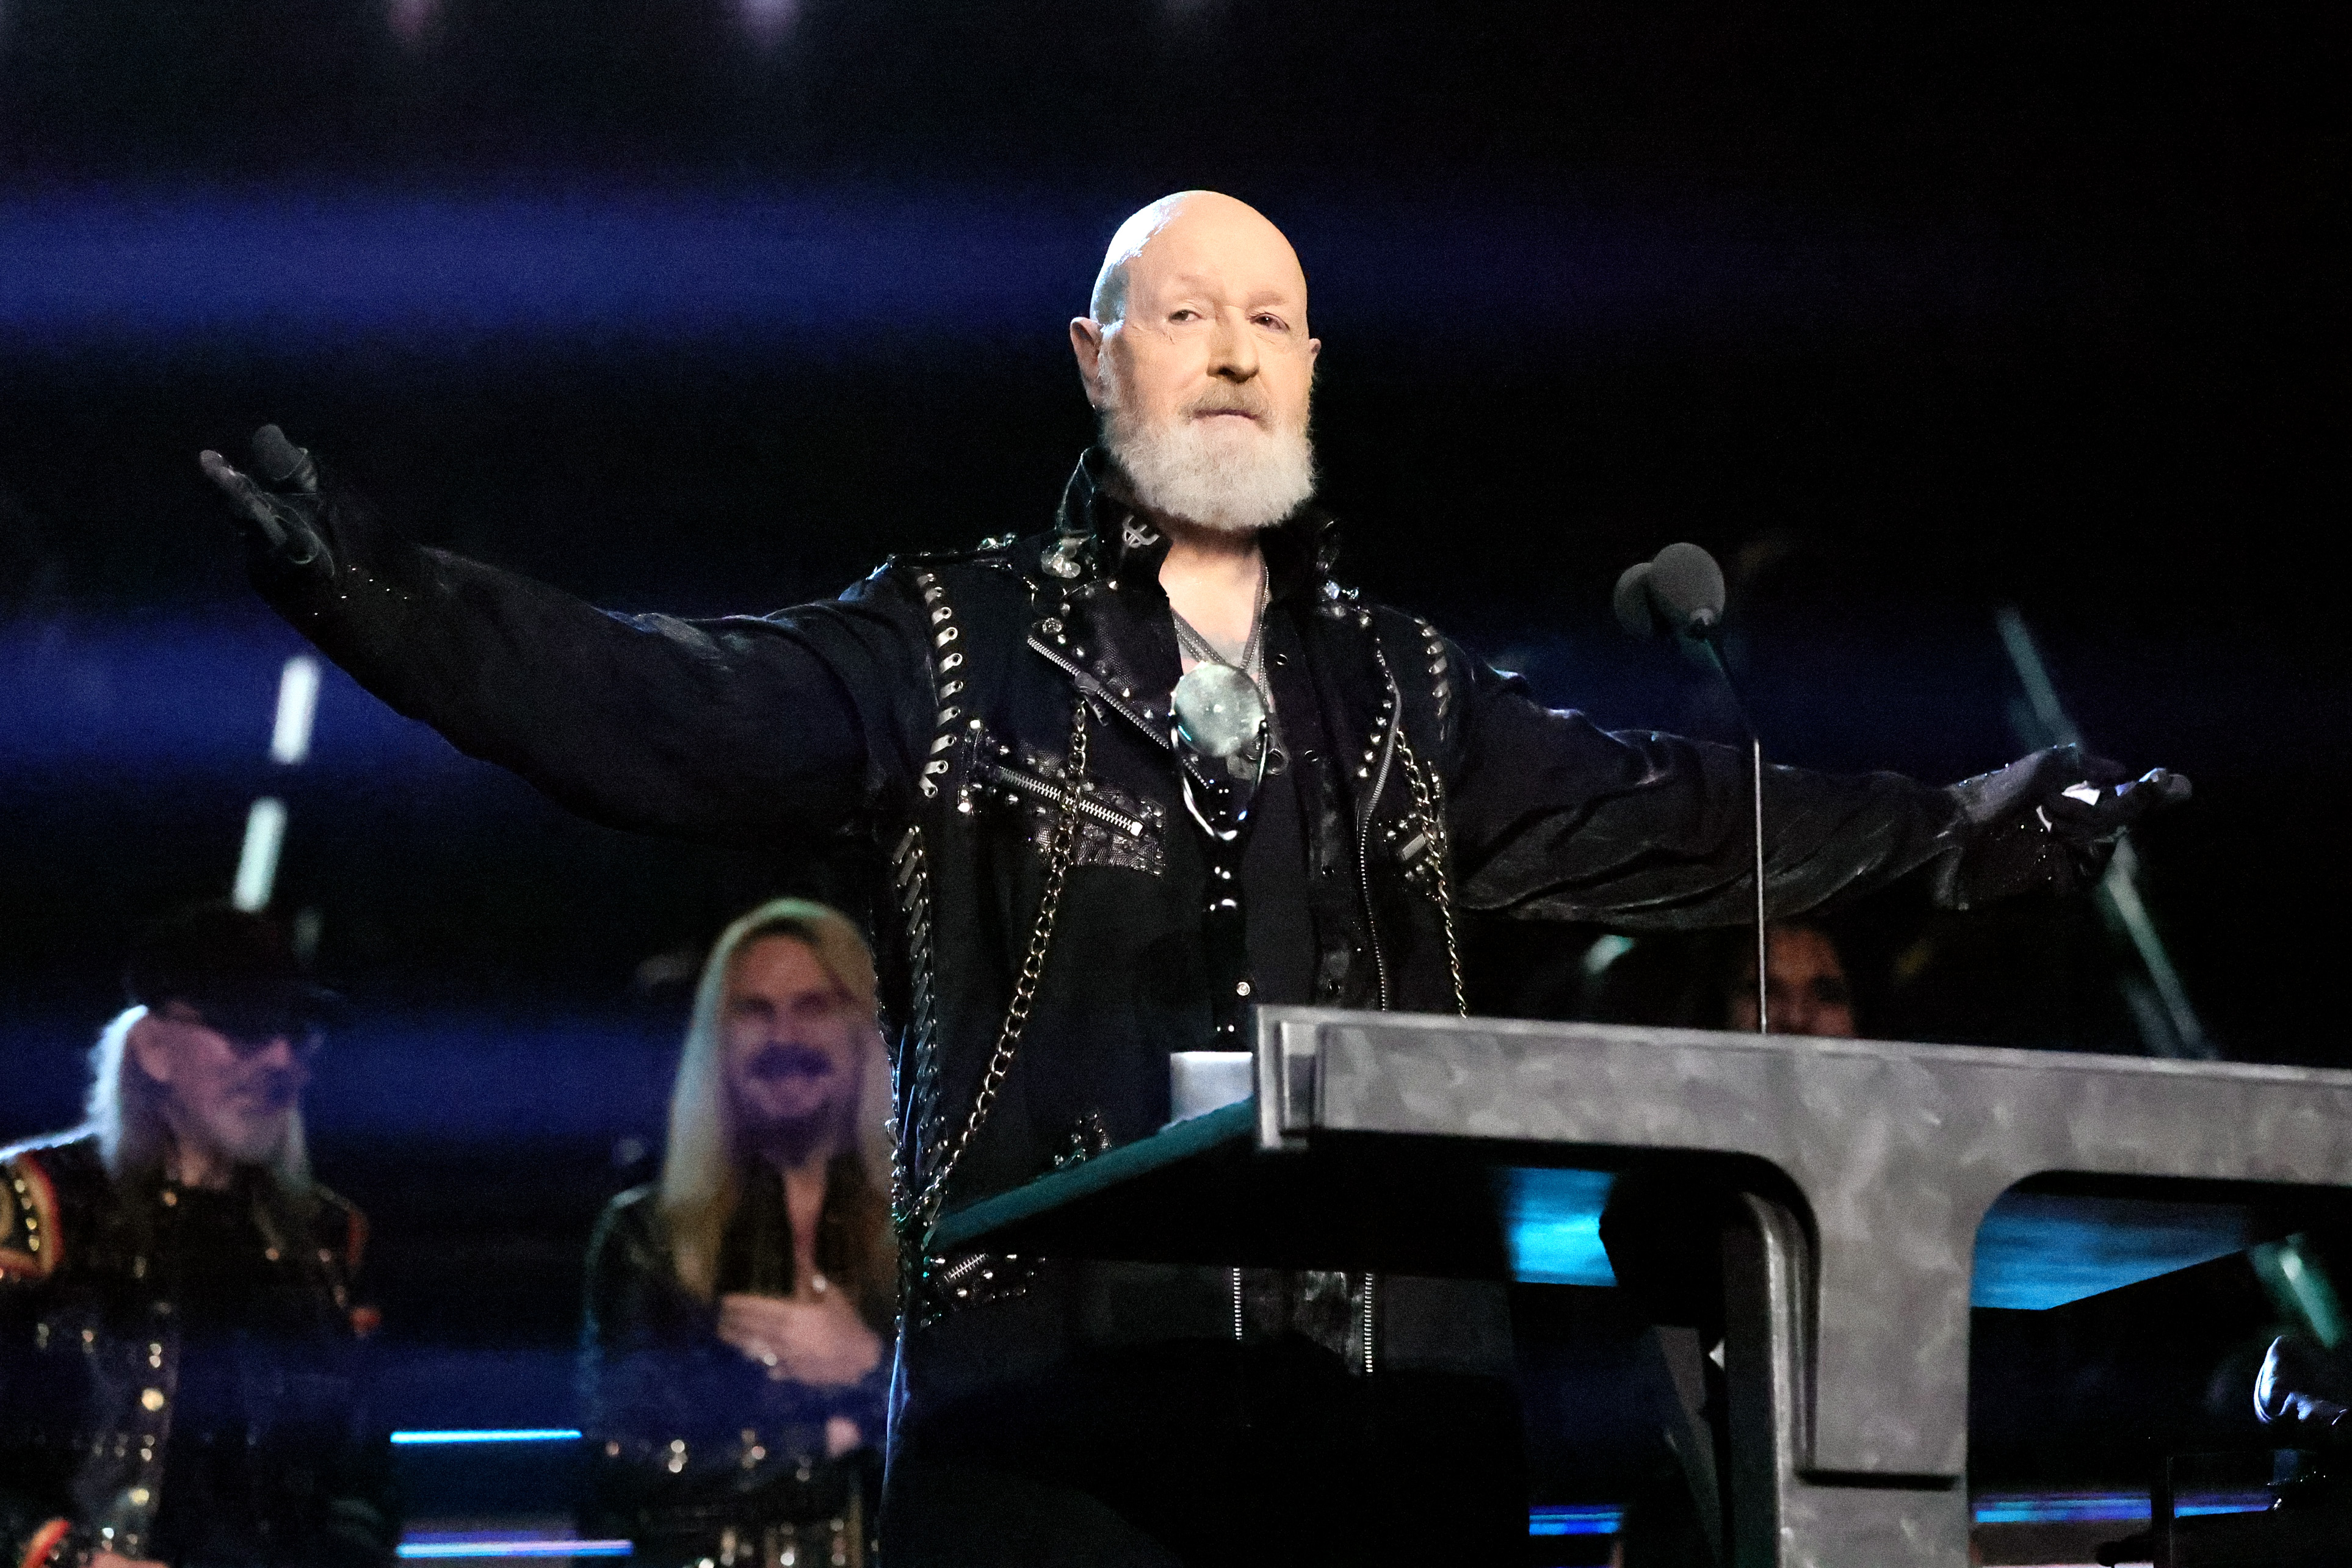 Rob Halford onstage during the 37th Annual Rock & Roll Hall of Fame Induction Ceremony on November 5, 2022, in Los Angeles, California. | Source: Getty Images